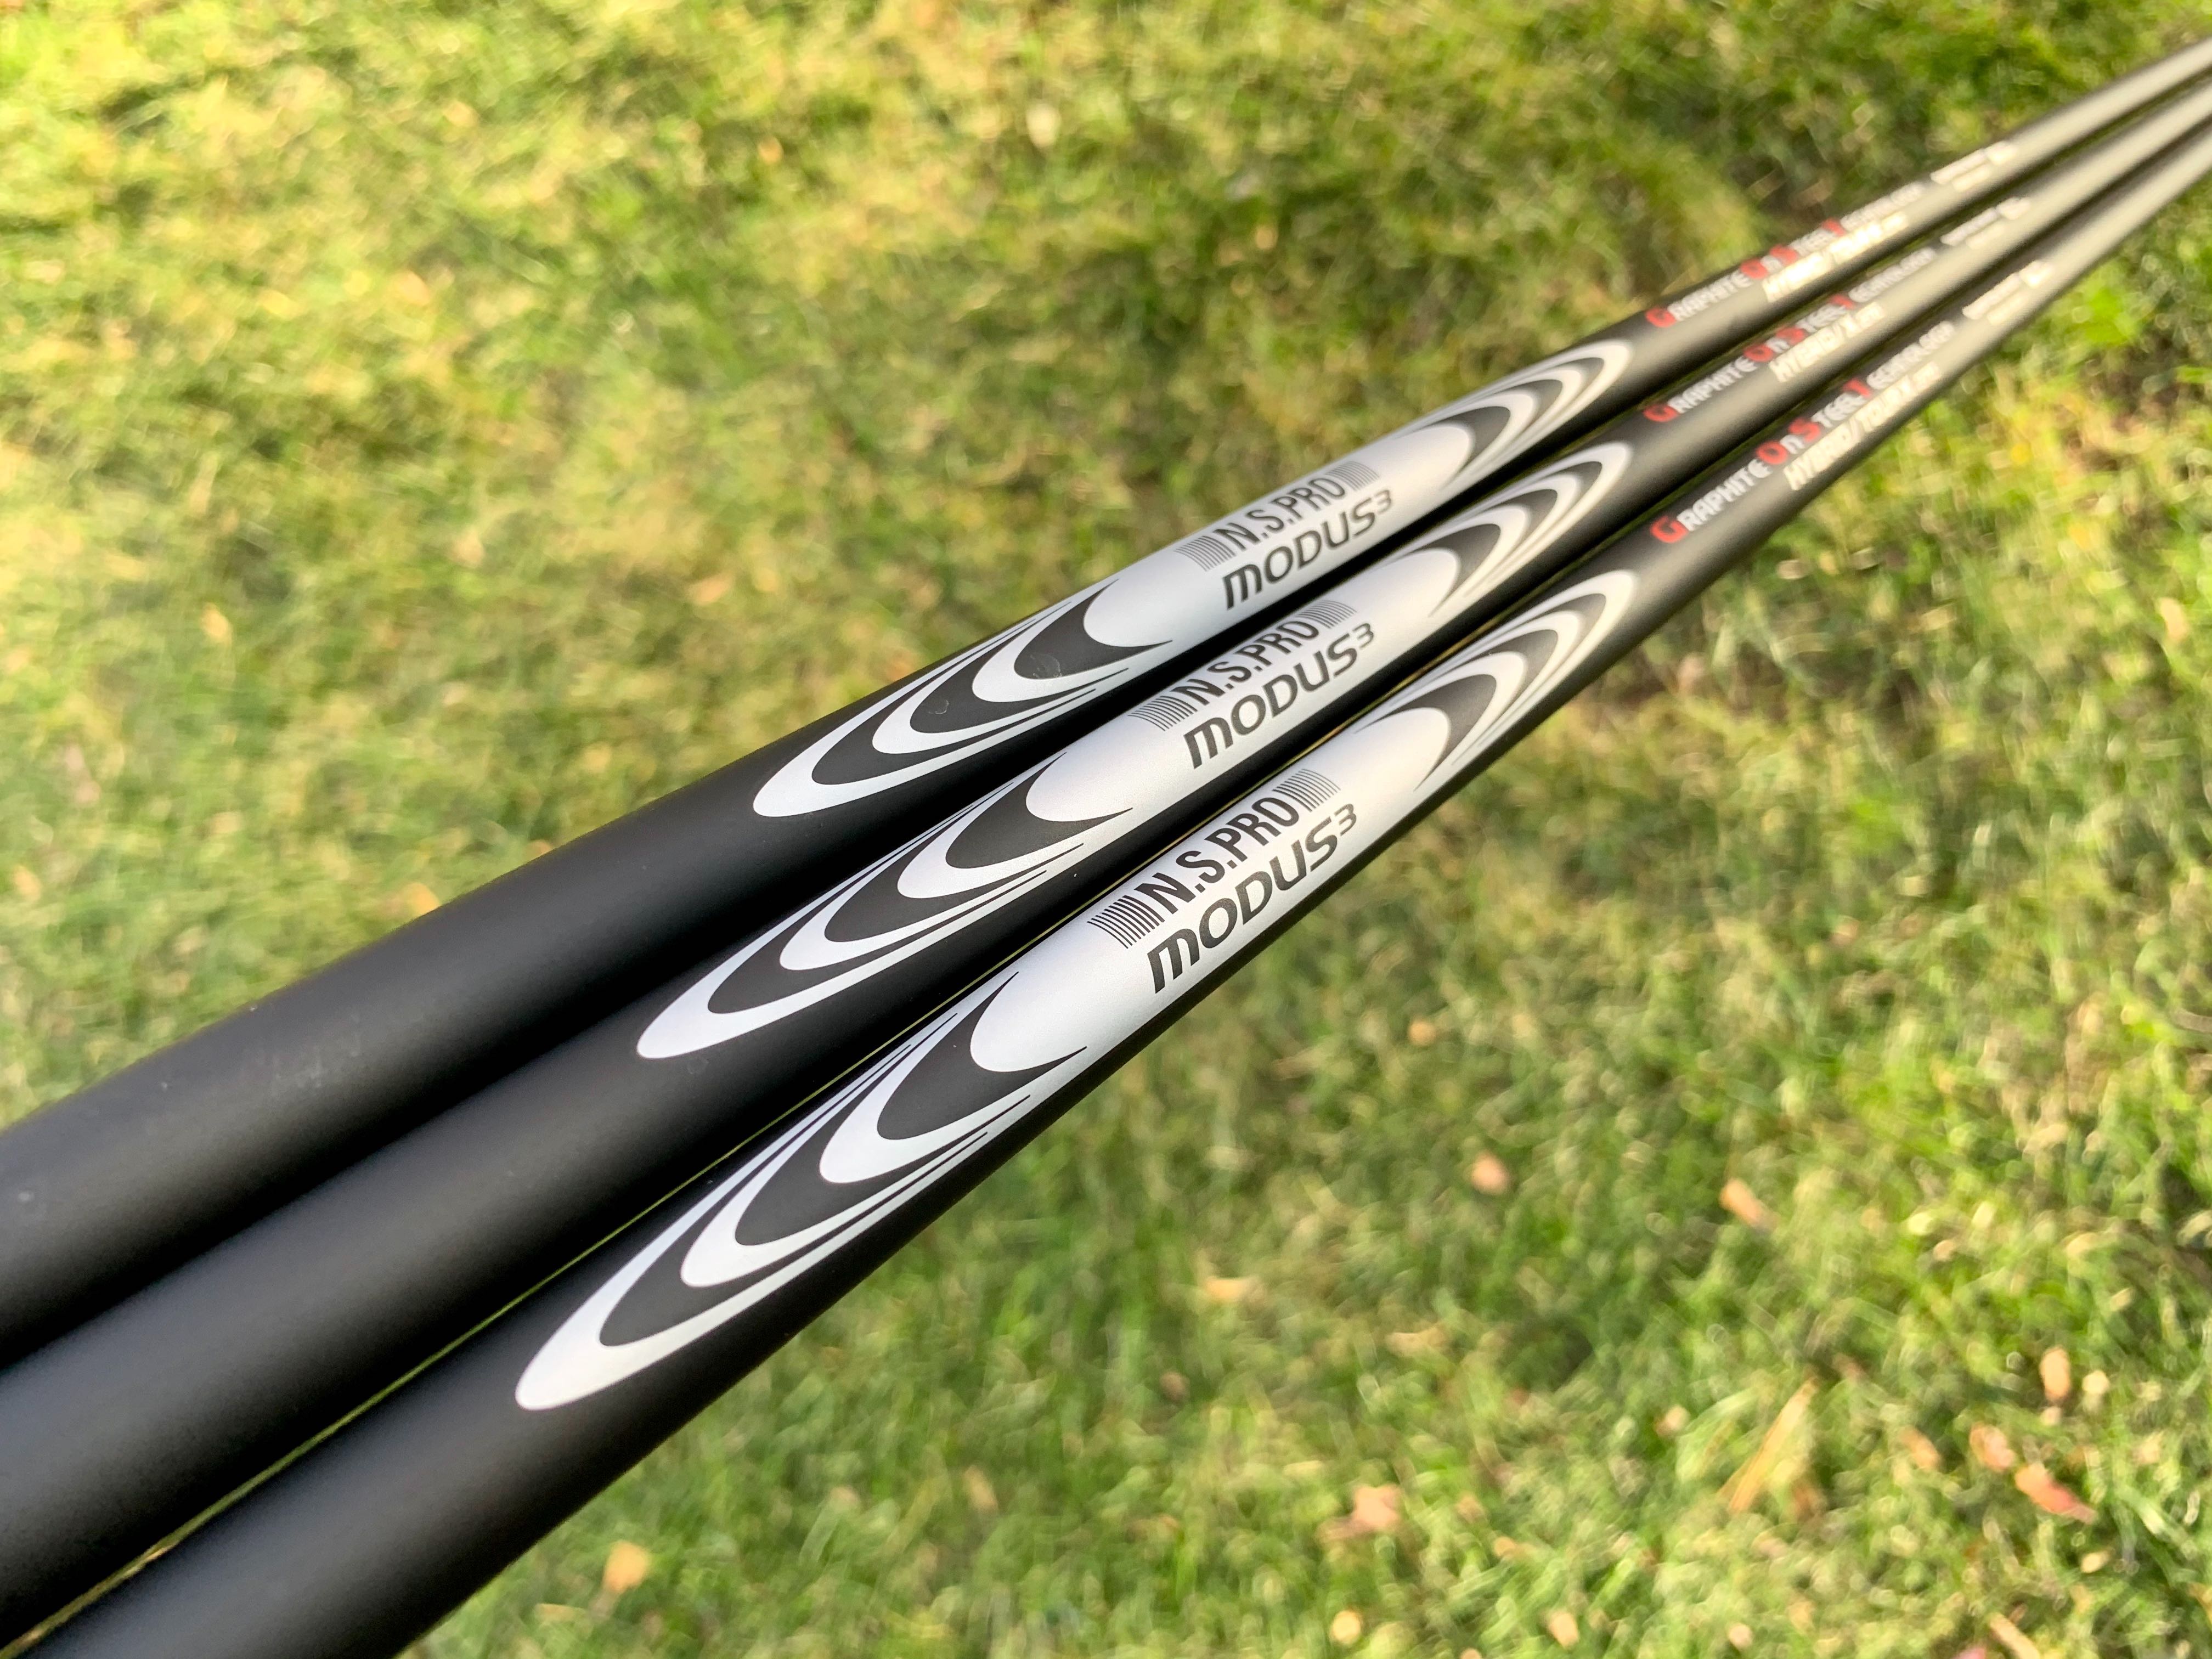 Nippon Golf Launches N.S. Pro Modus³ Graphite on Steel Technology (G.O